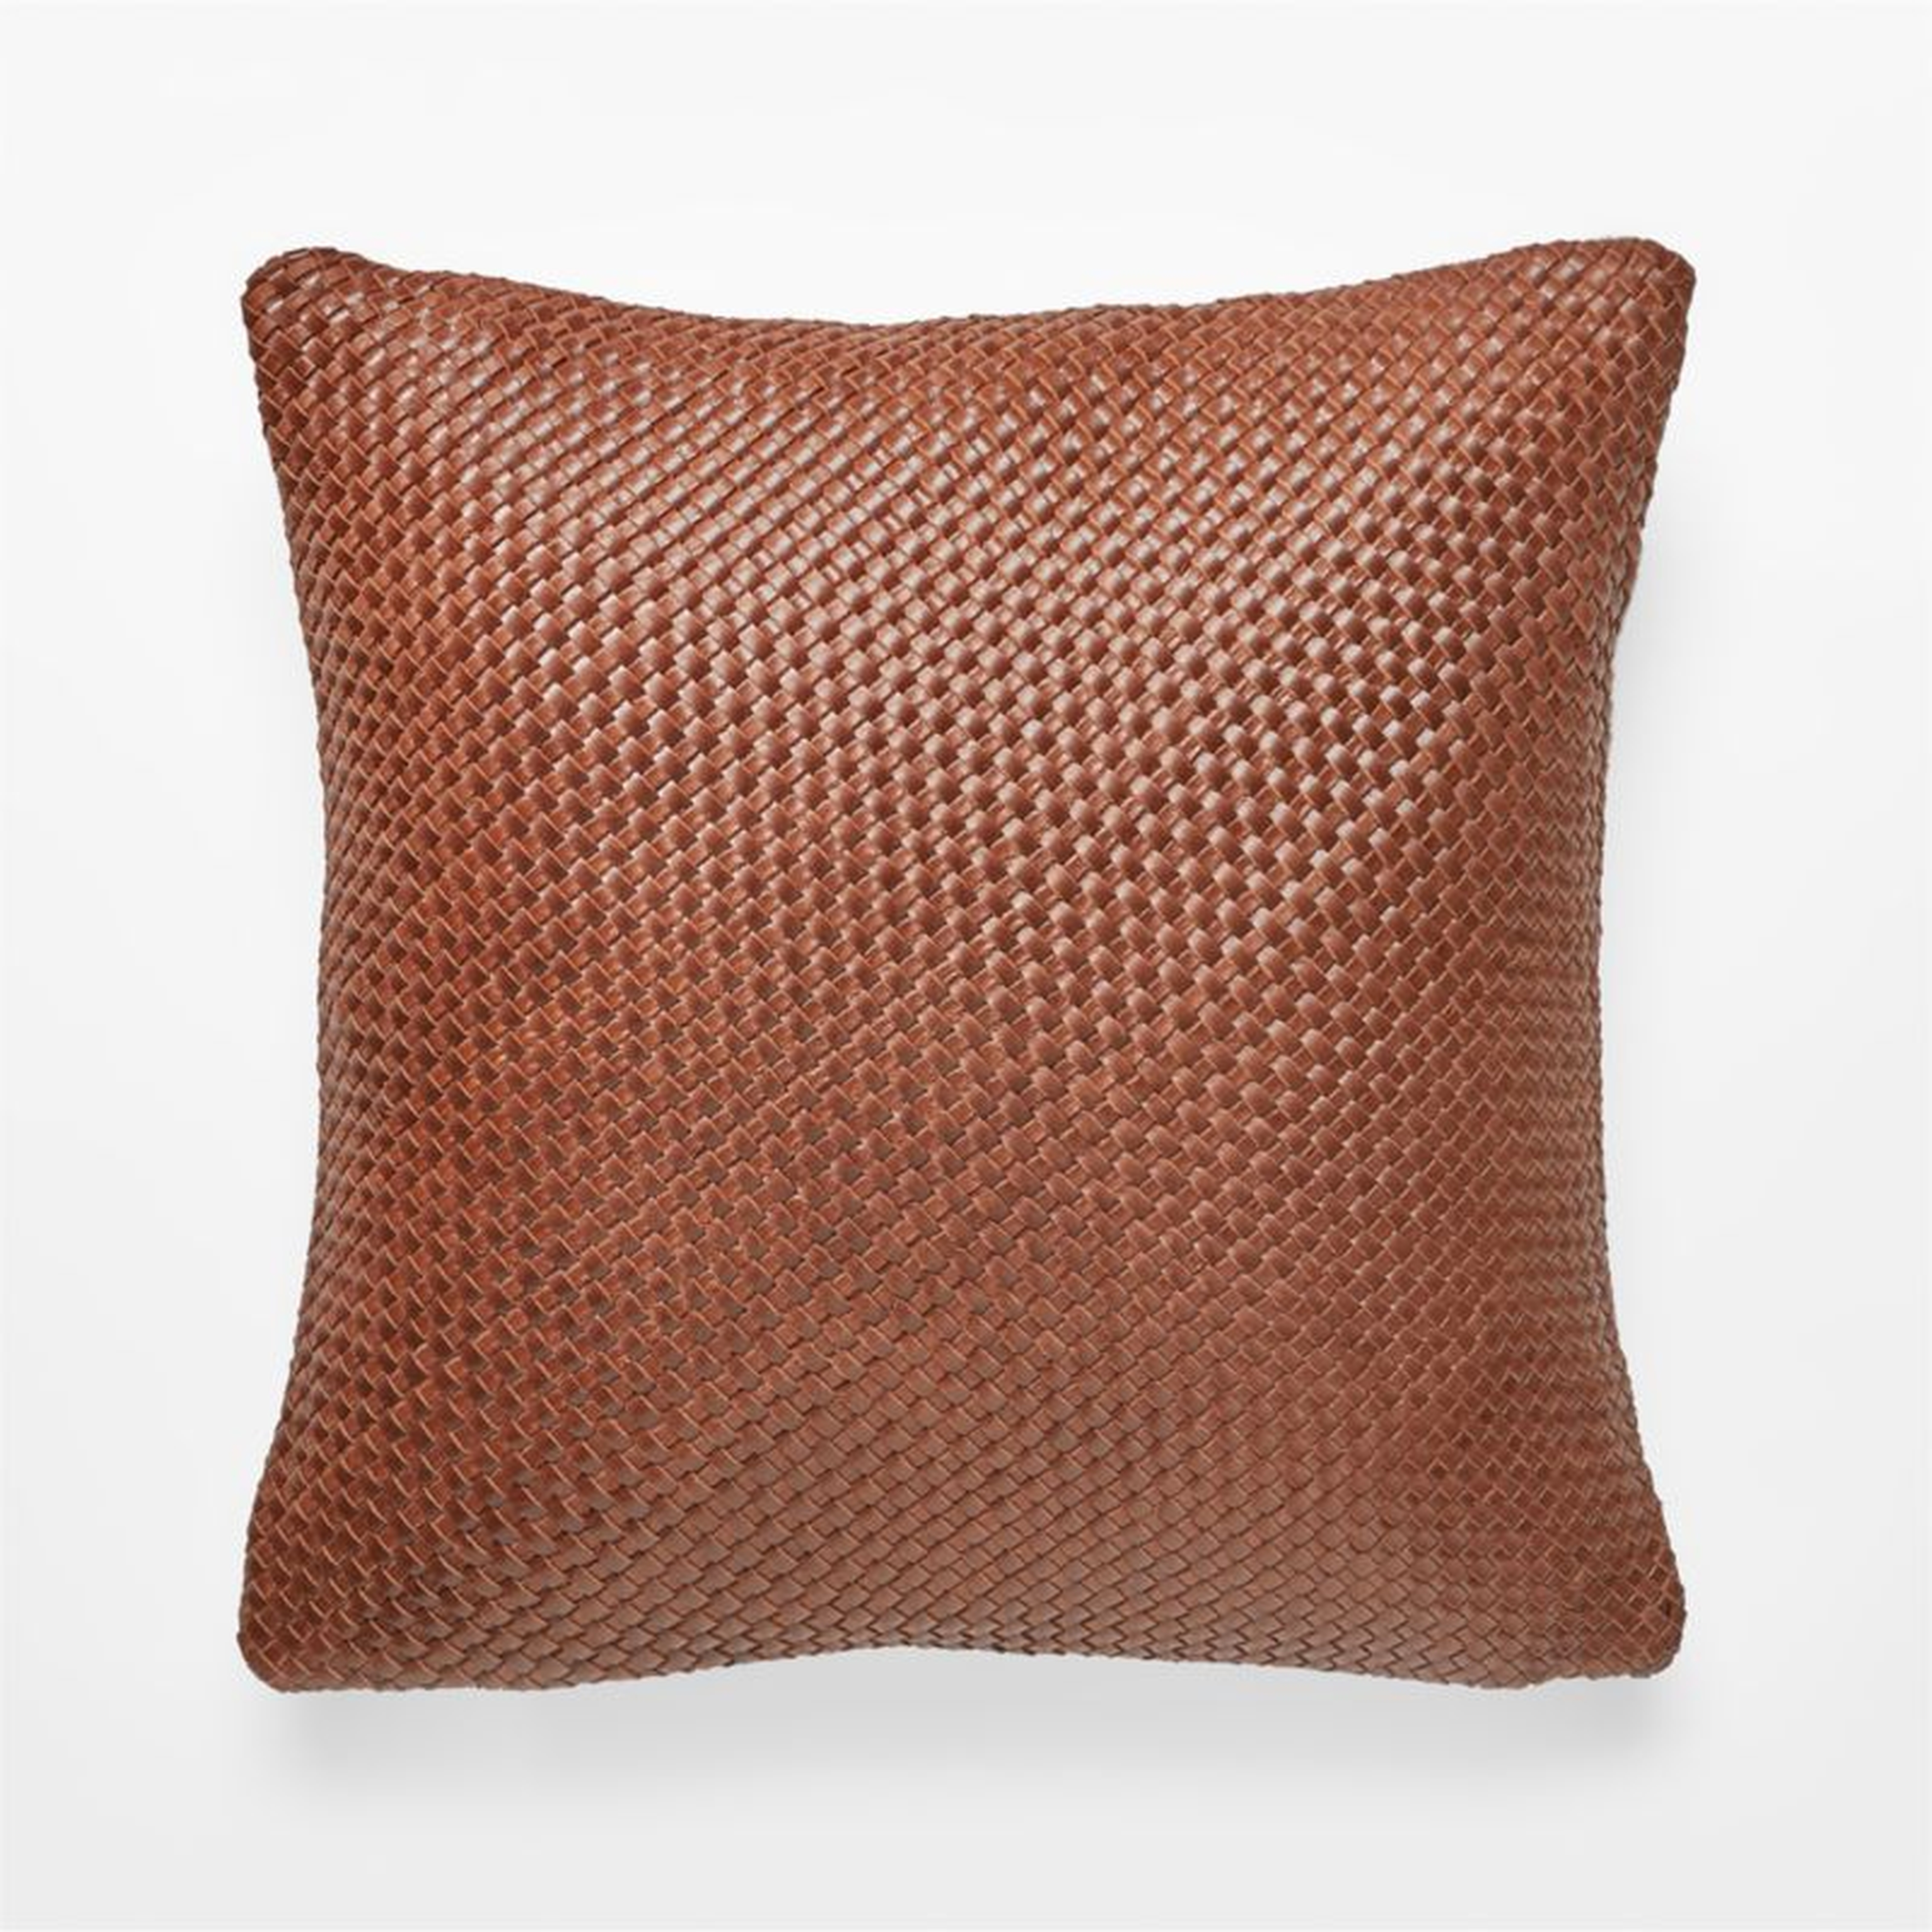 Route Leather Pillow, Chocolate, 18" x 18" - CB2